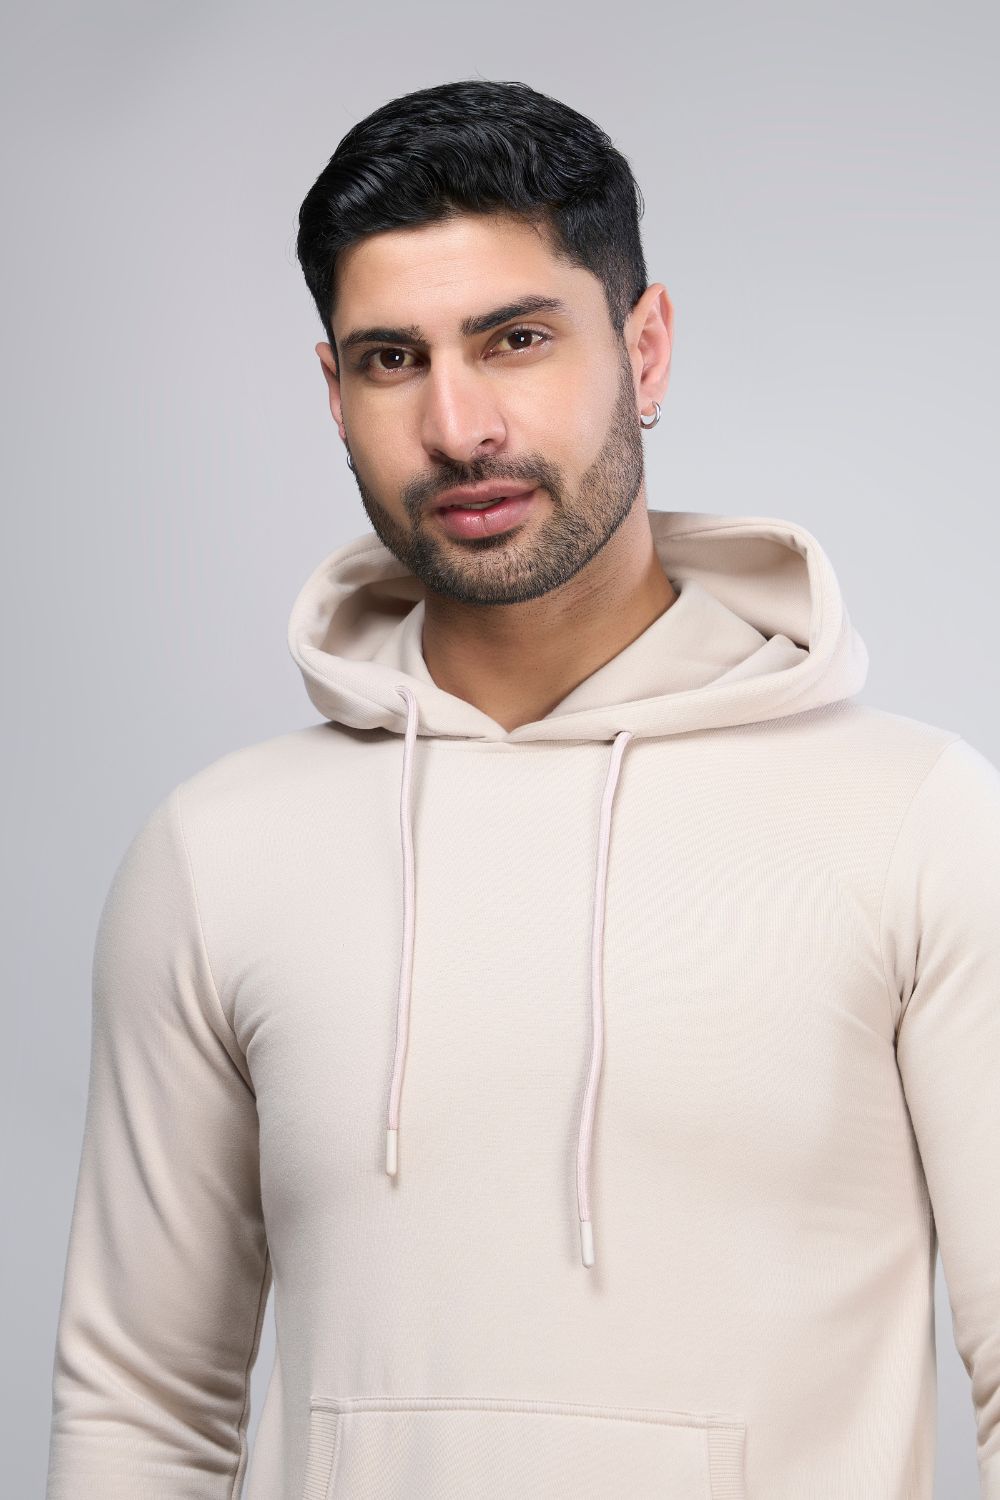 Soft Beige colored, hoodie for men with full sleeves and relaxed fit, close up.